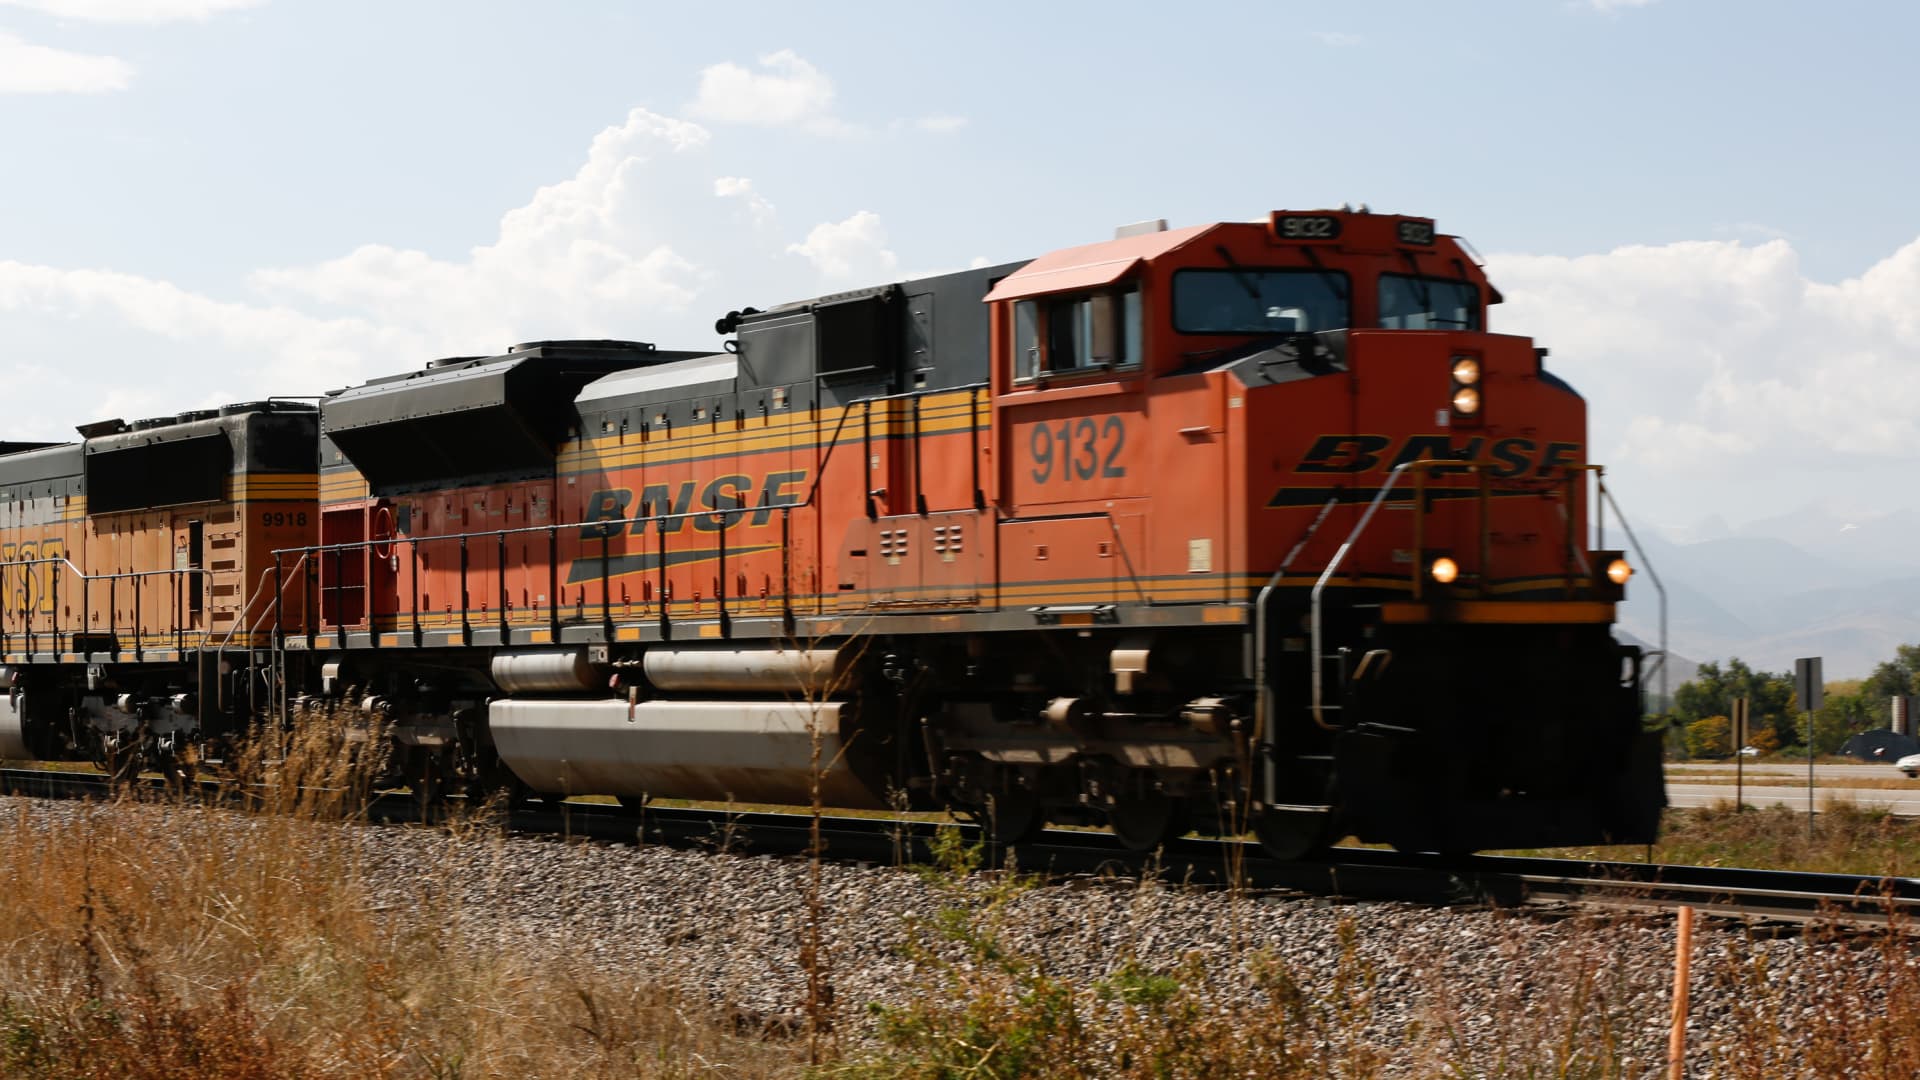 Railroad strike negotiations held up by battle over sick time policies